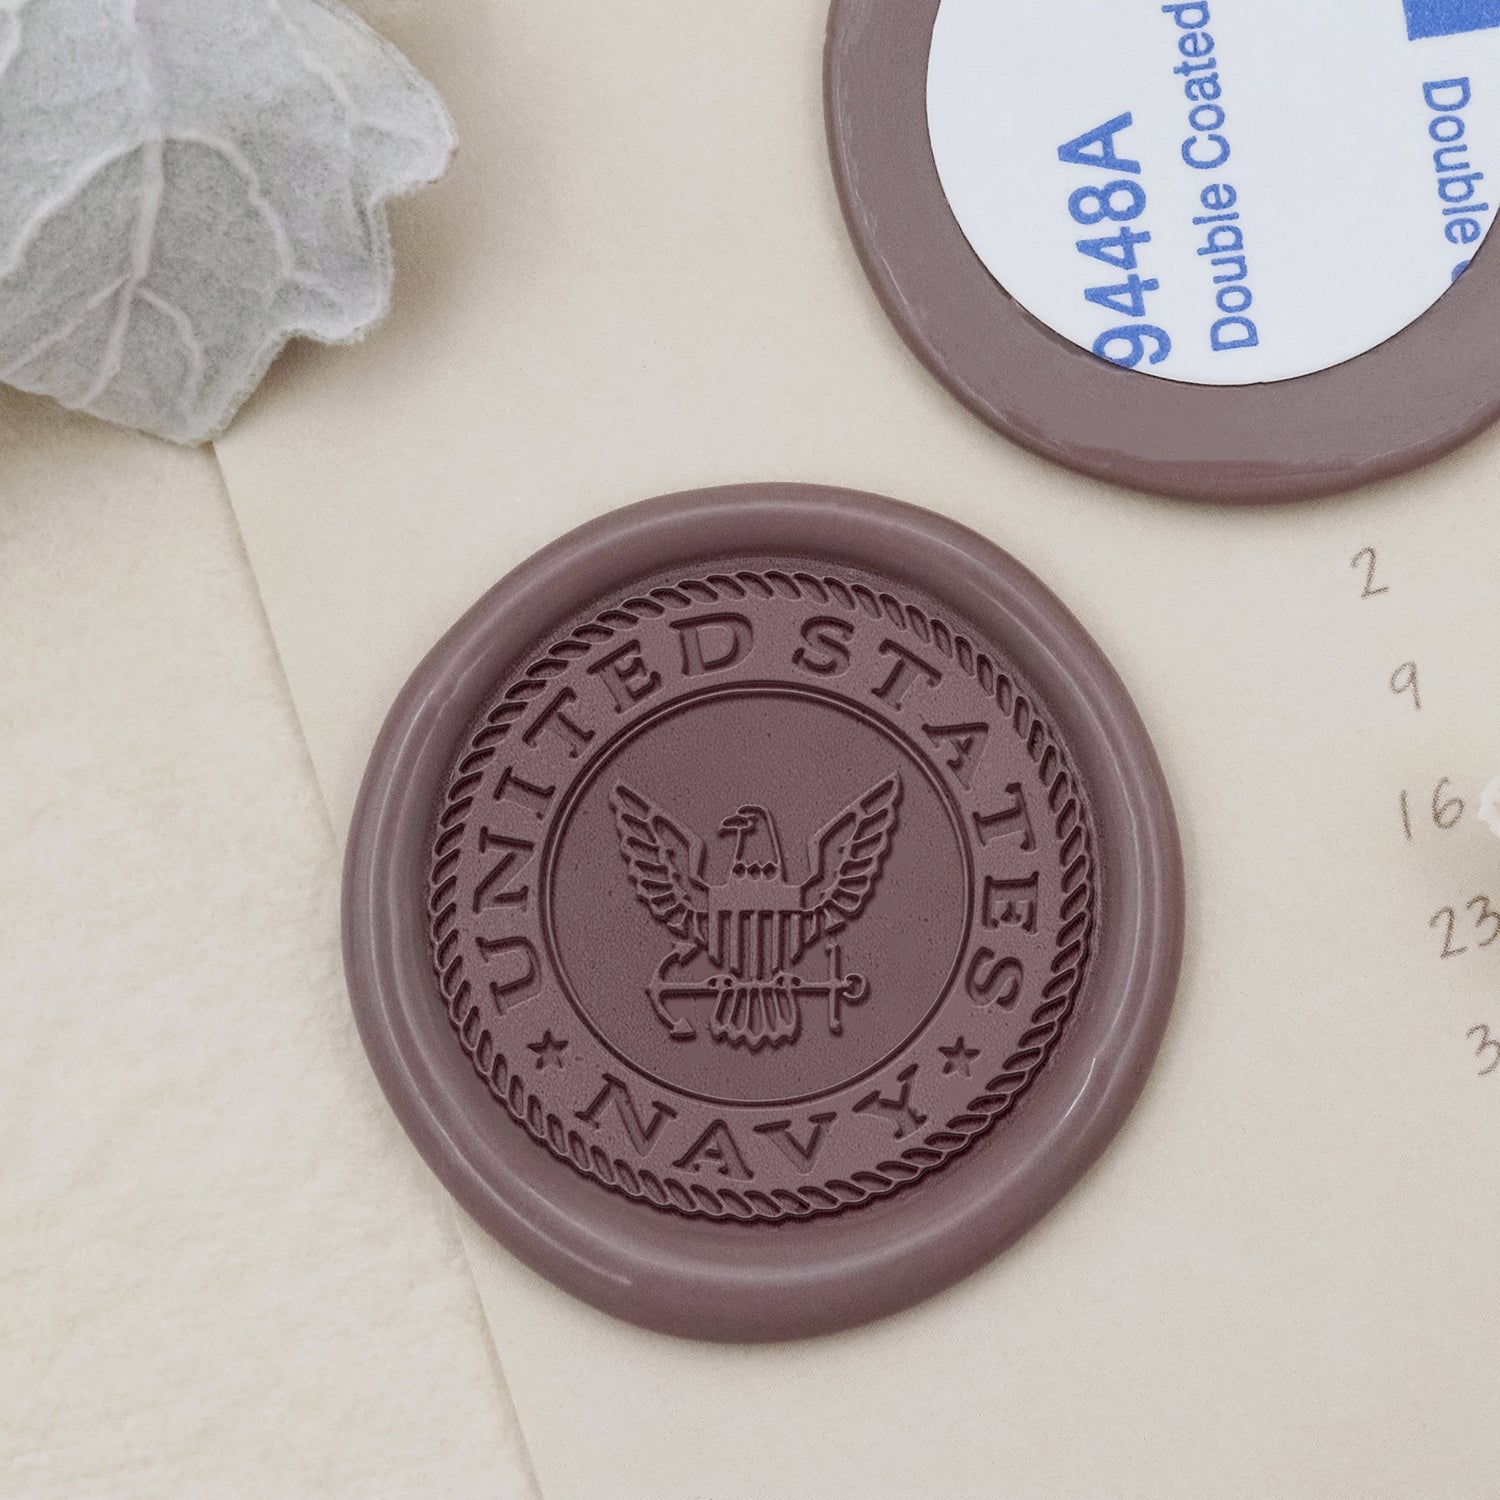 Stamprints US Navy Wax-adhesive Wax Seal Stickers - style 12-1